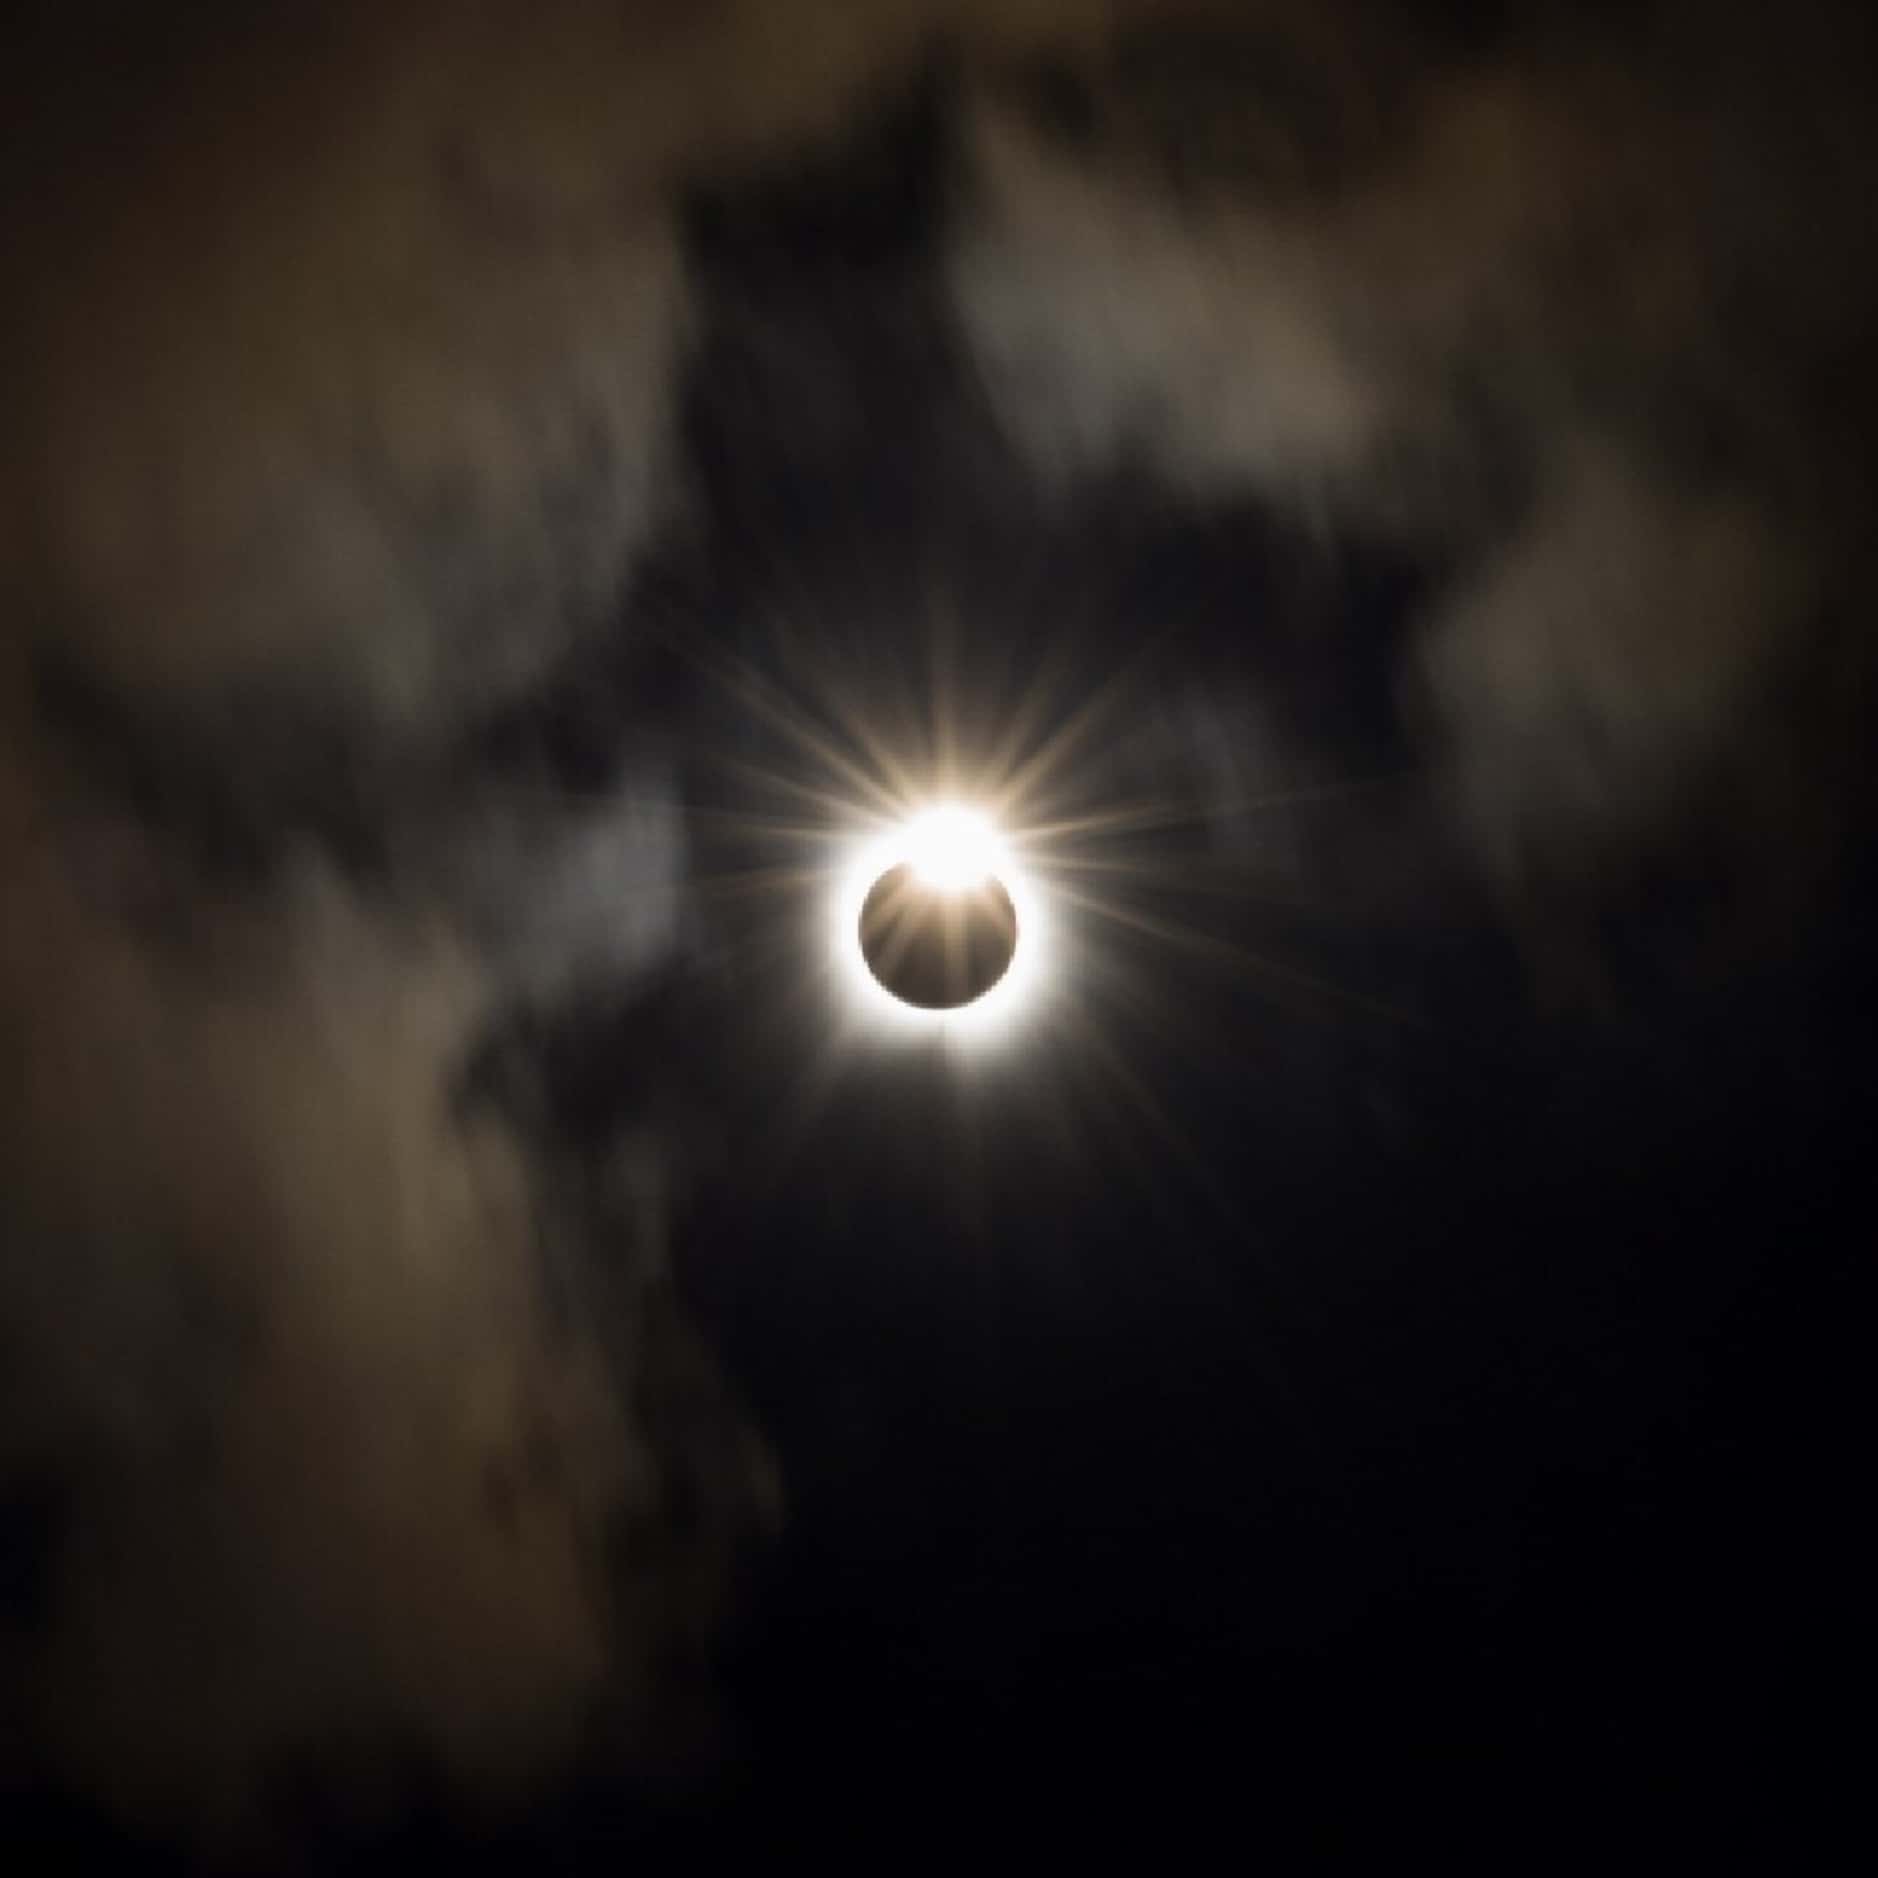 The solar eclipse is seen in Frisco, Texas. Provided by Lenny Glick